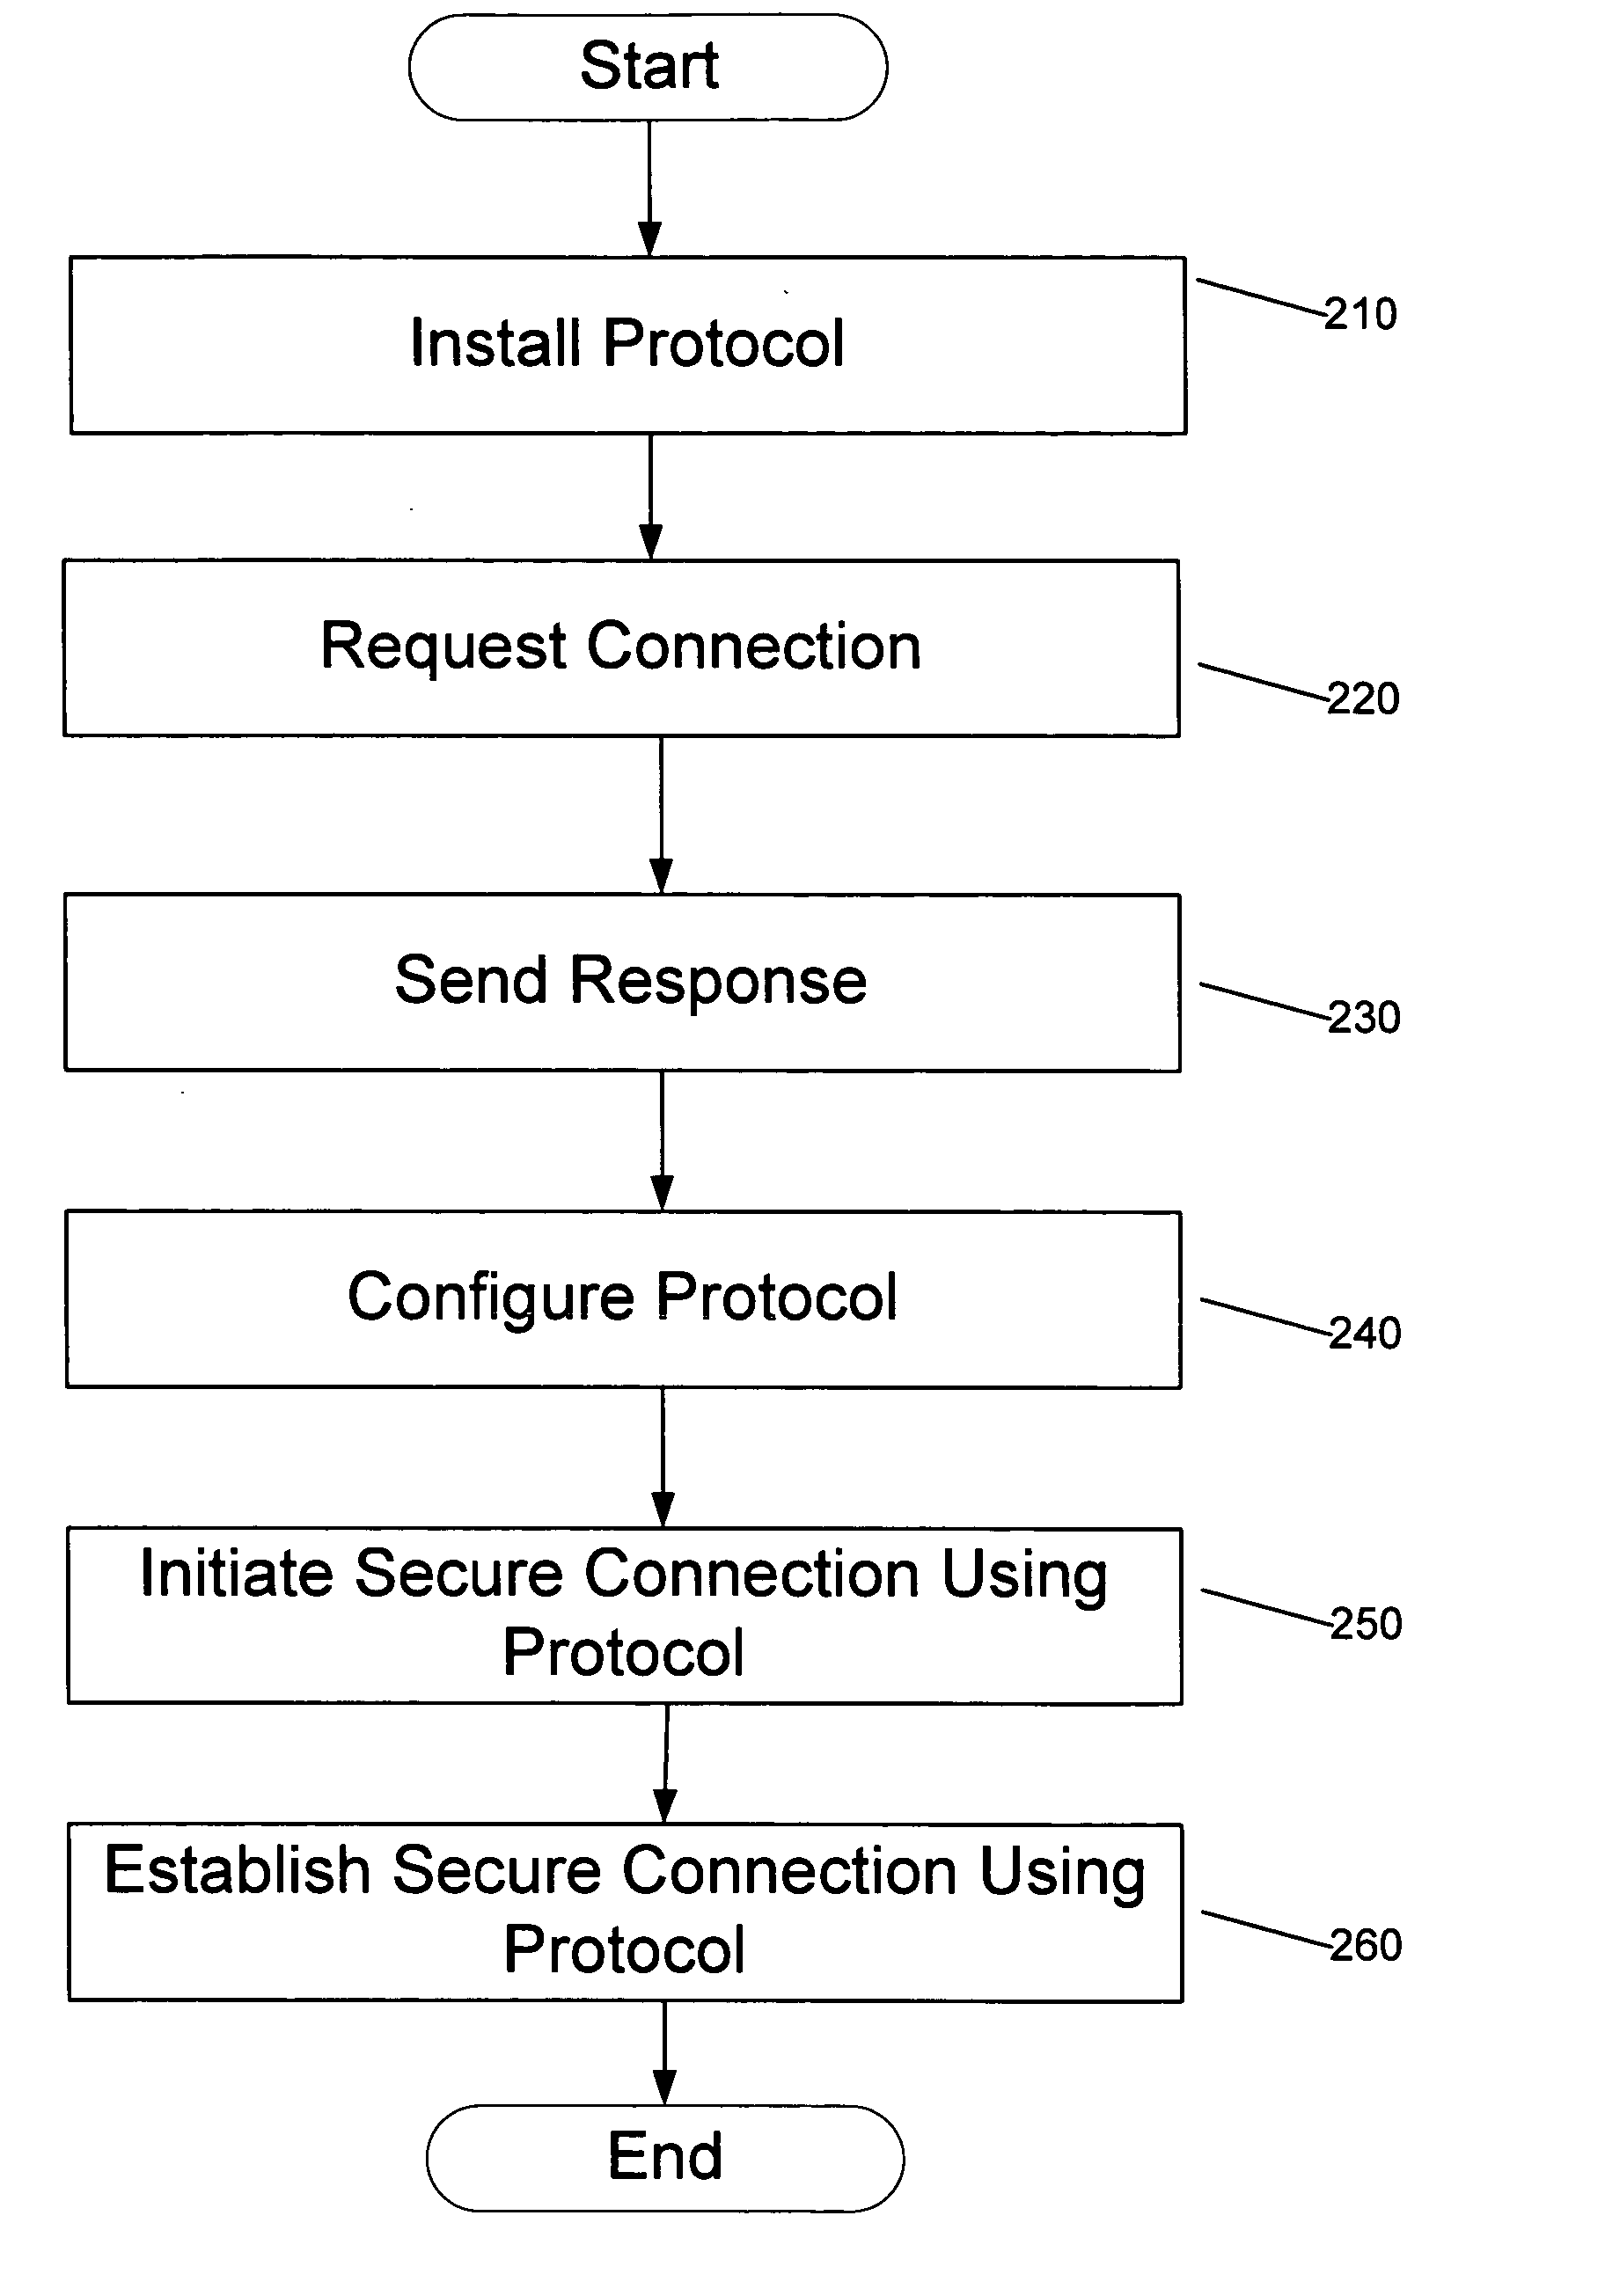 System and method for providing a secure connection between networked computers